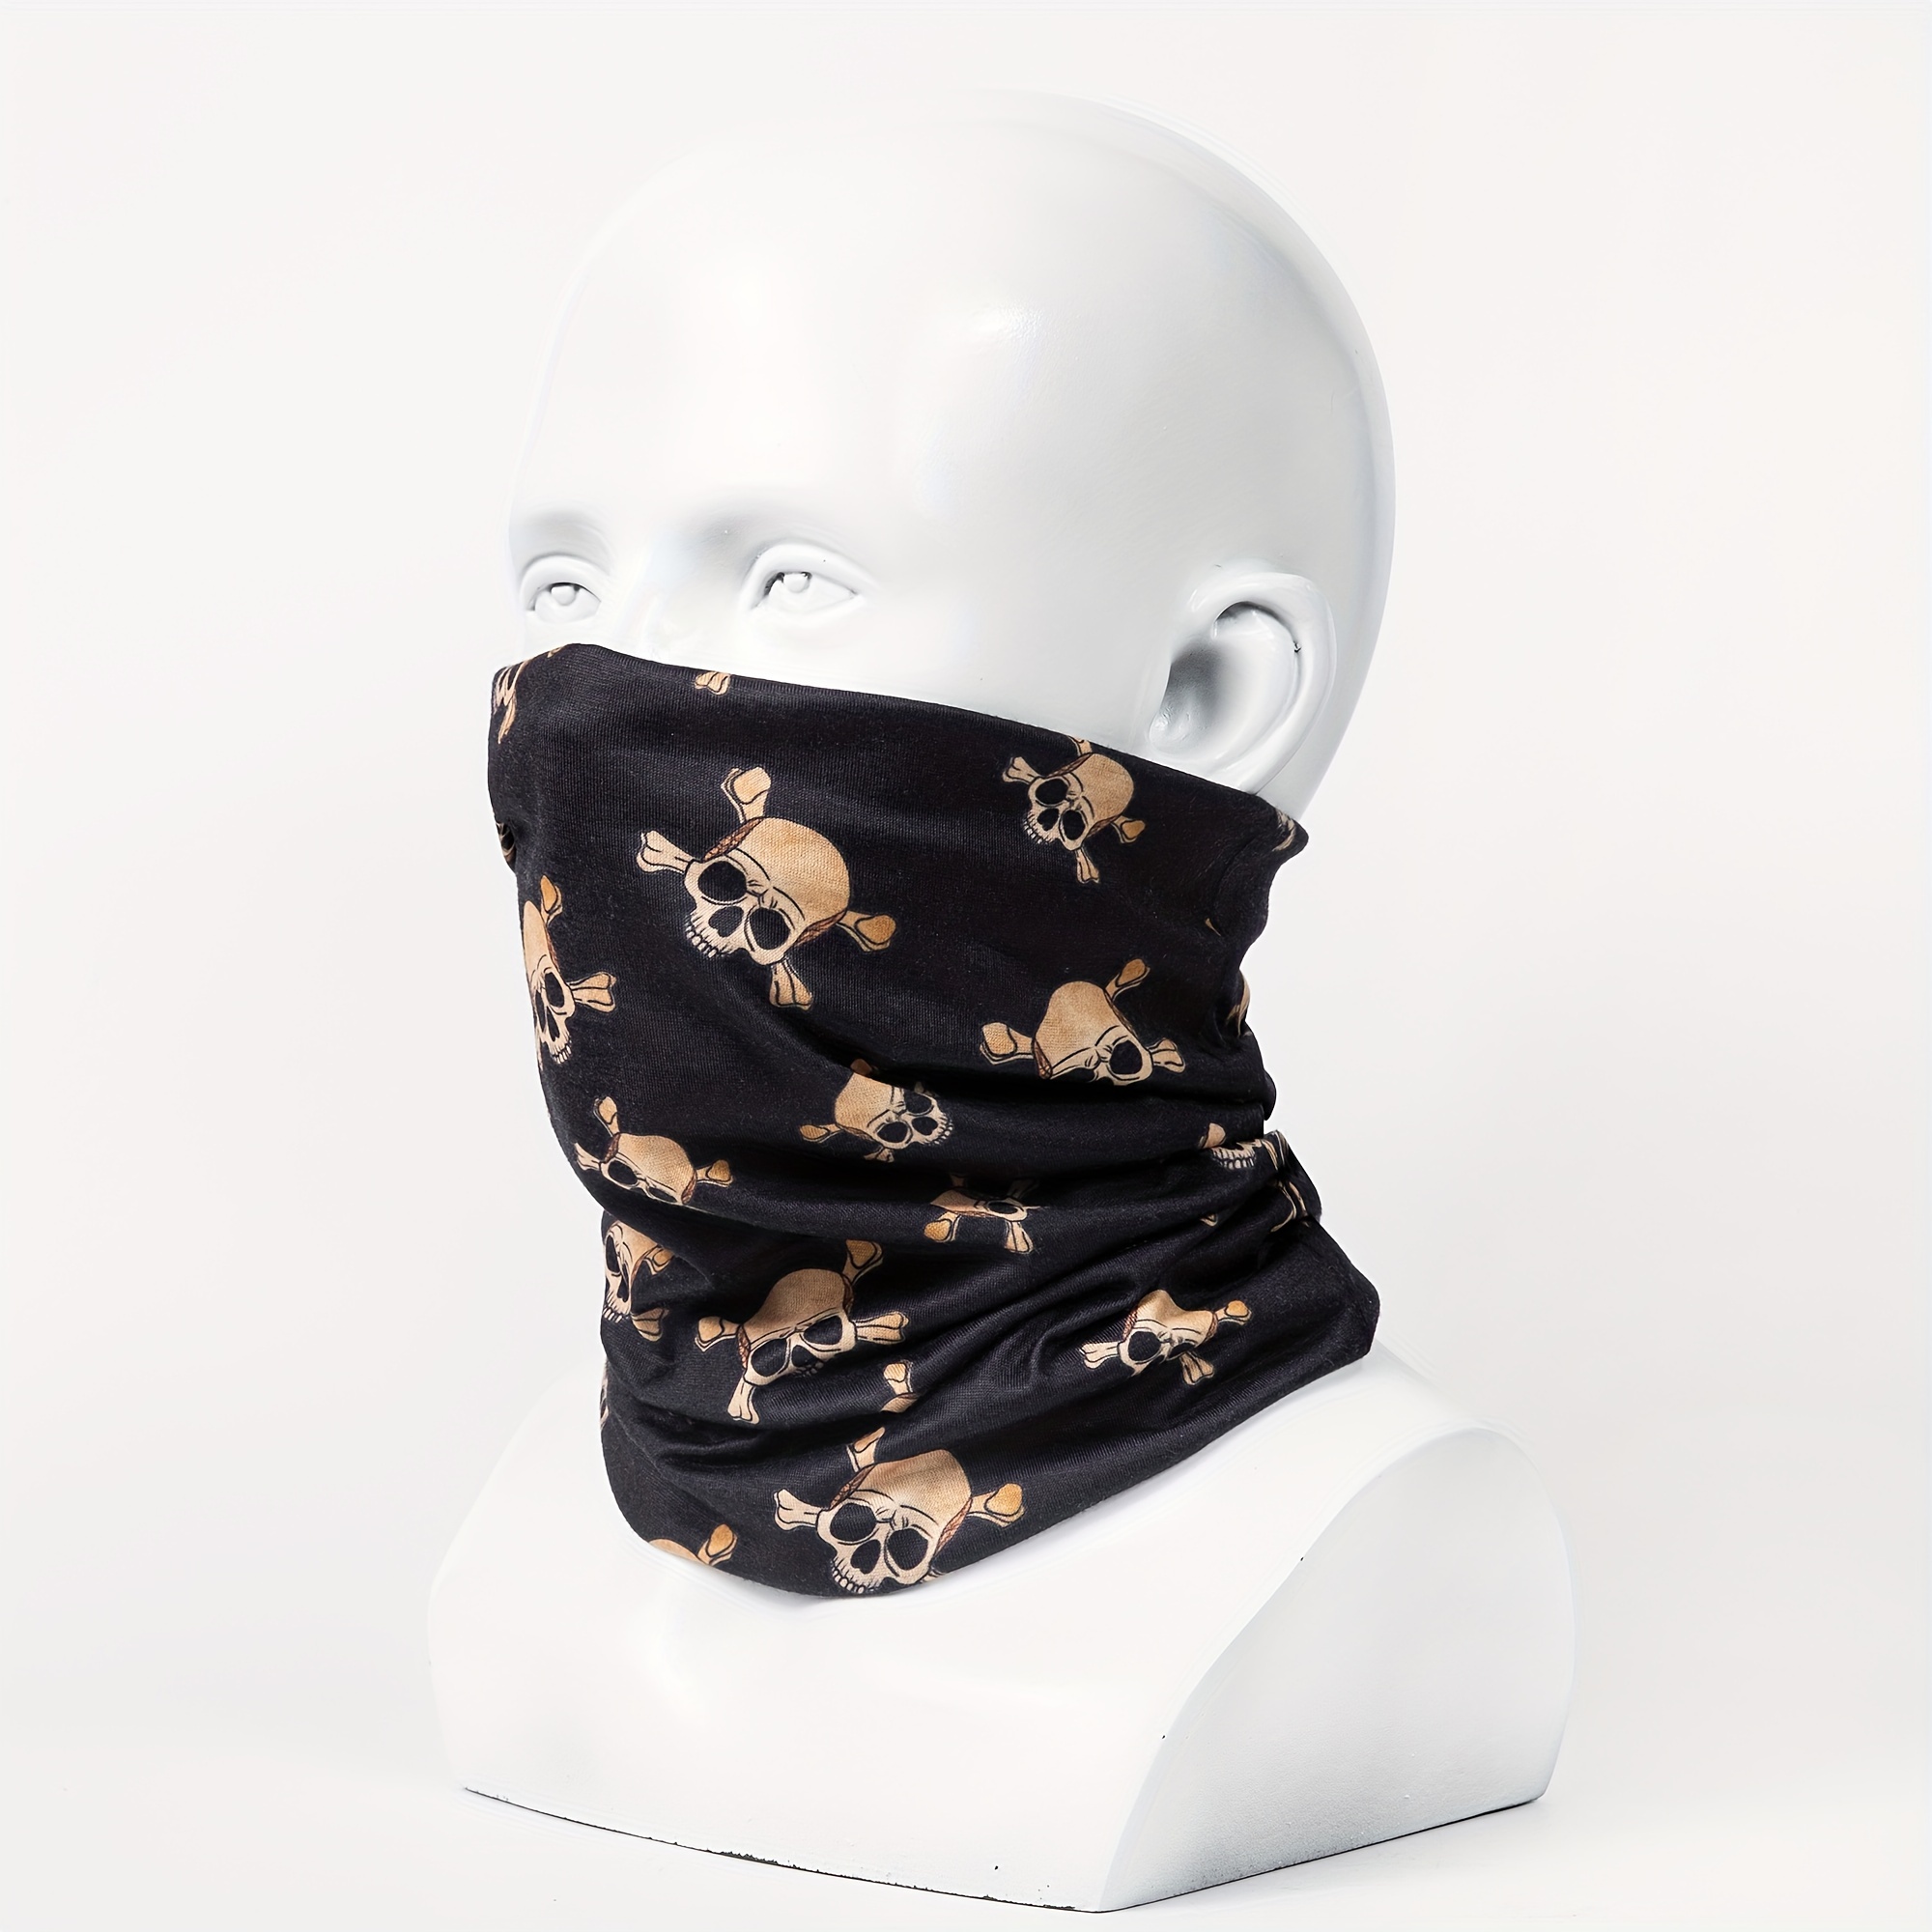 4pcs Camouflage Cycling Scarf Sports Neck Gaiter Sun Protection Head Cover  Men's Outdoor Fishing & Cycling Cooling Mask